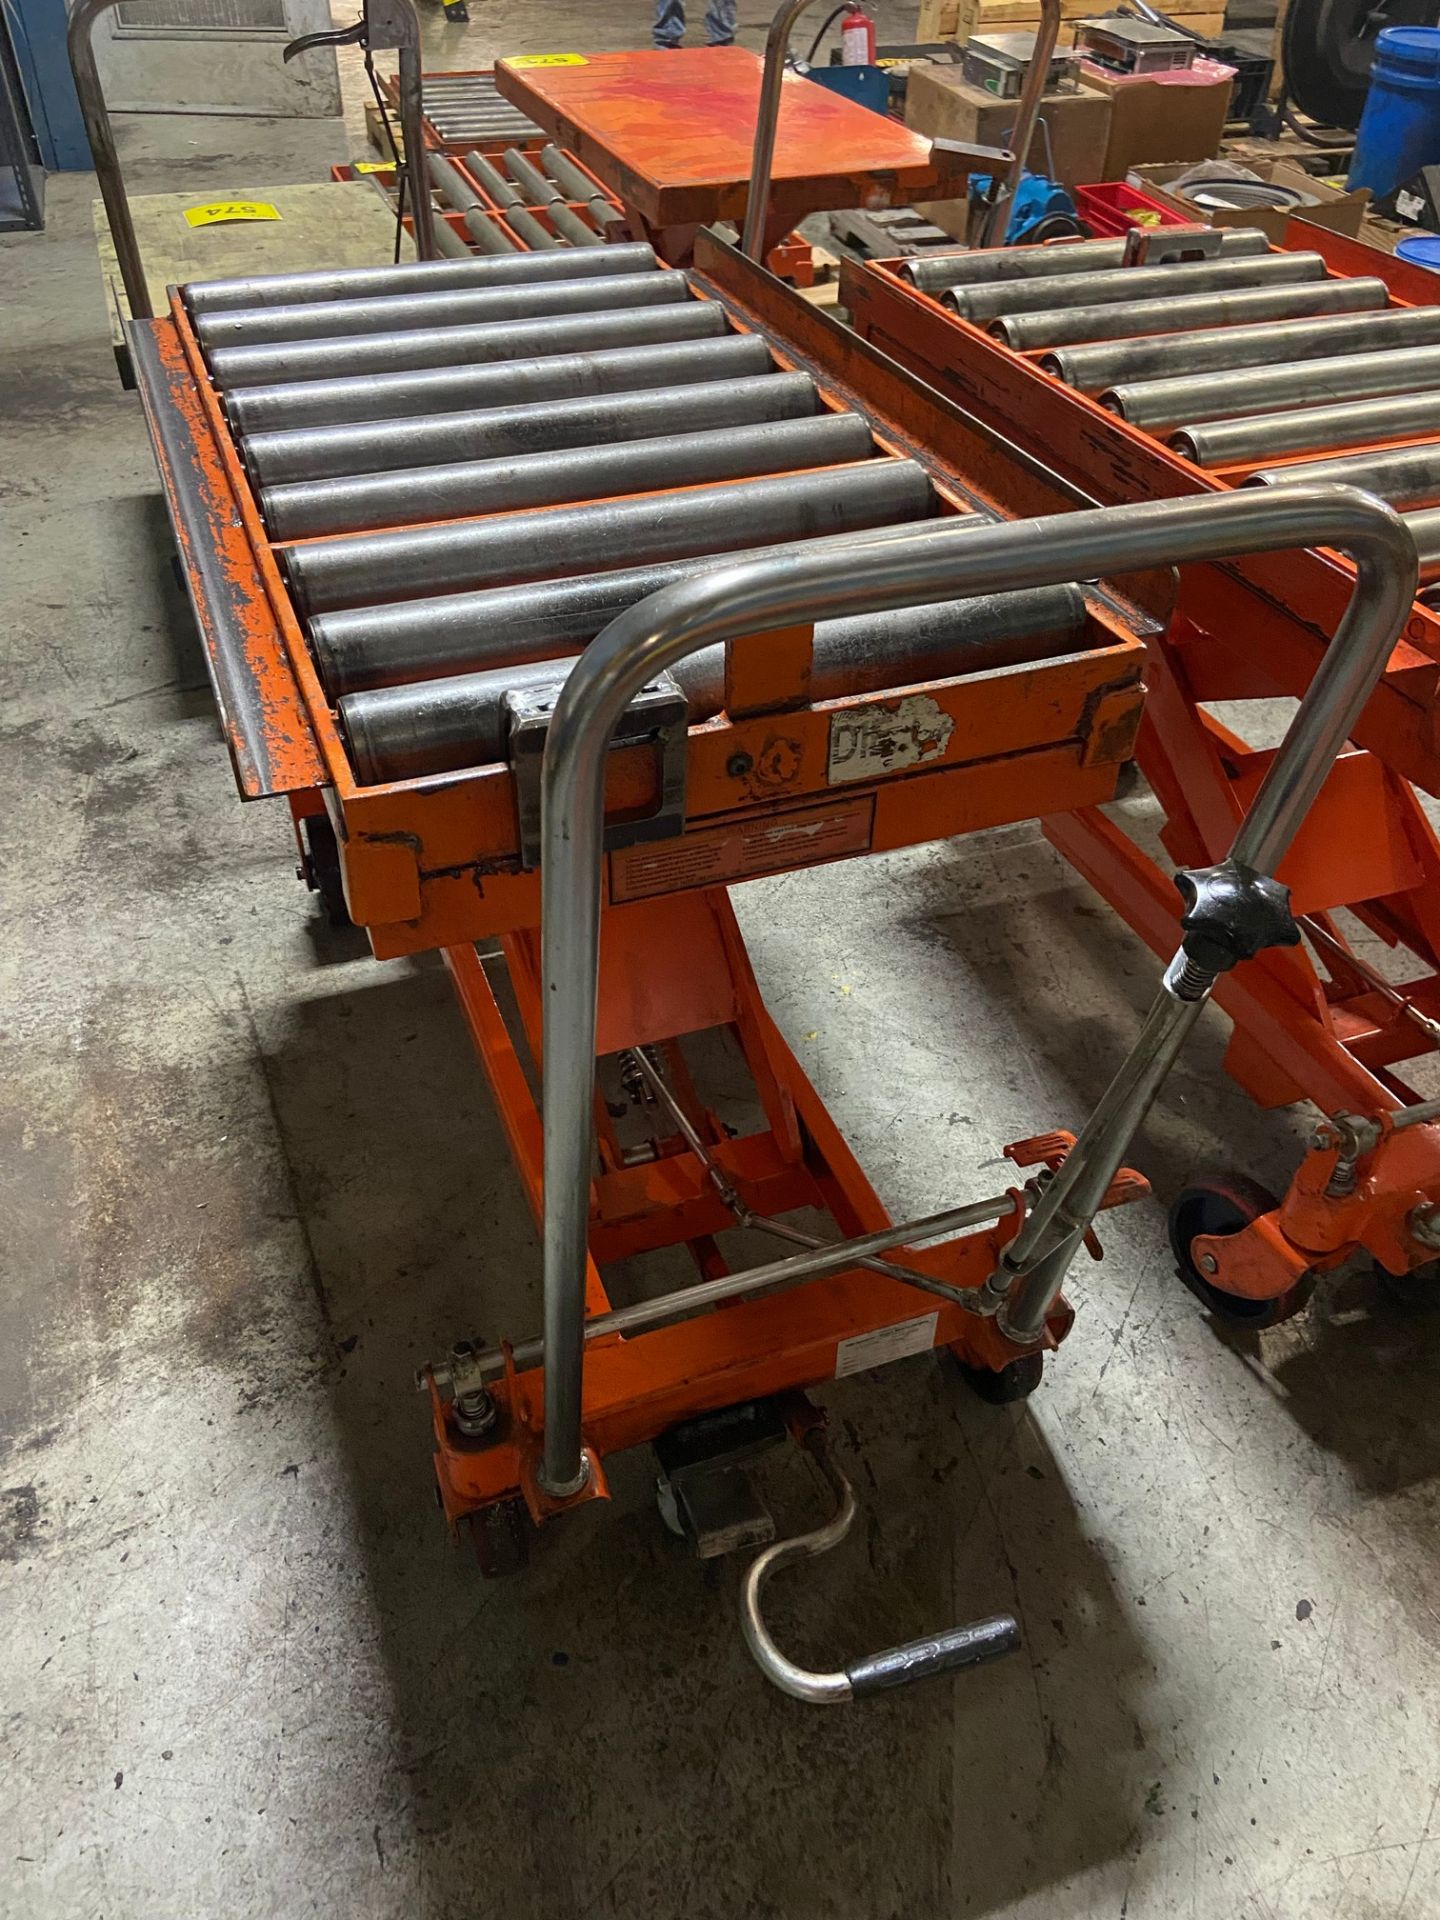 PORTABLE DIE LIFT TABLE ON CASTORS, 1650 LBS, C/W 19" X 39" ROLL TOP CONVEYOR & CABLE WINCH - Image 3 of 4